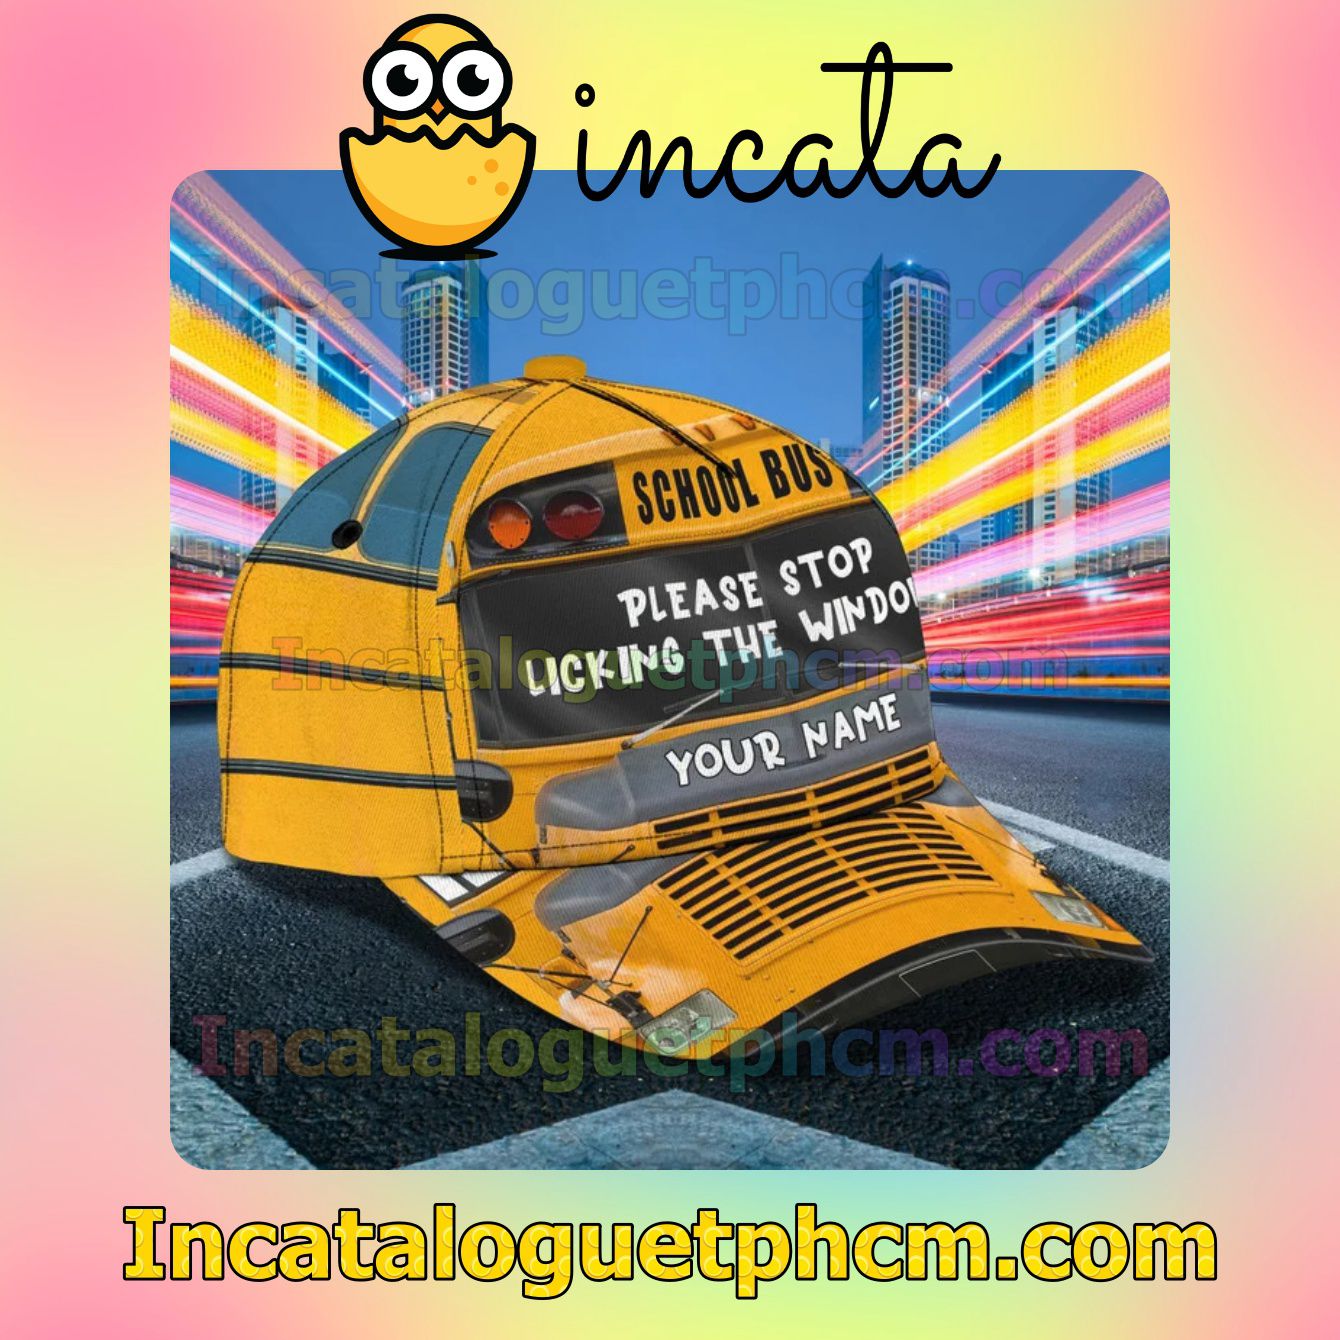 Best Personalized School Bus Please Stop Licking The Windows Classic Hat Caps Gift For Men